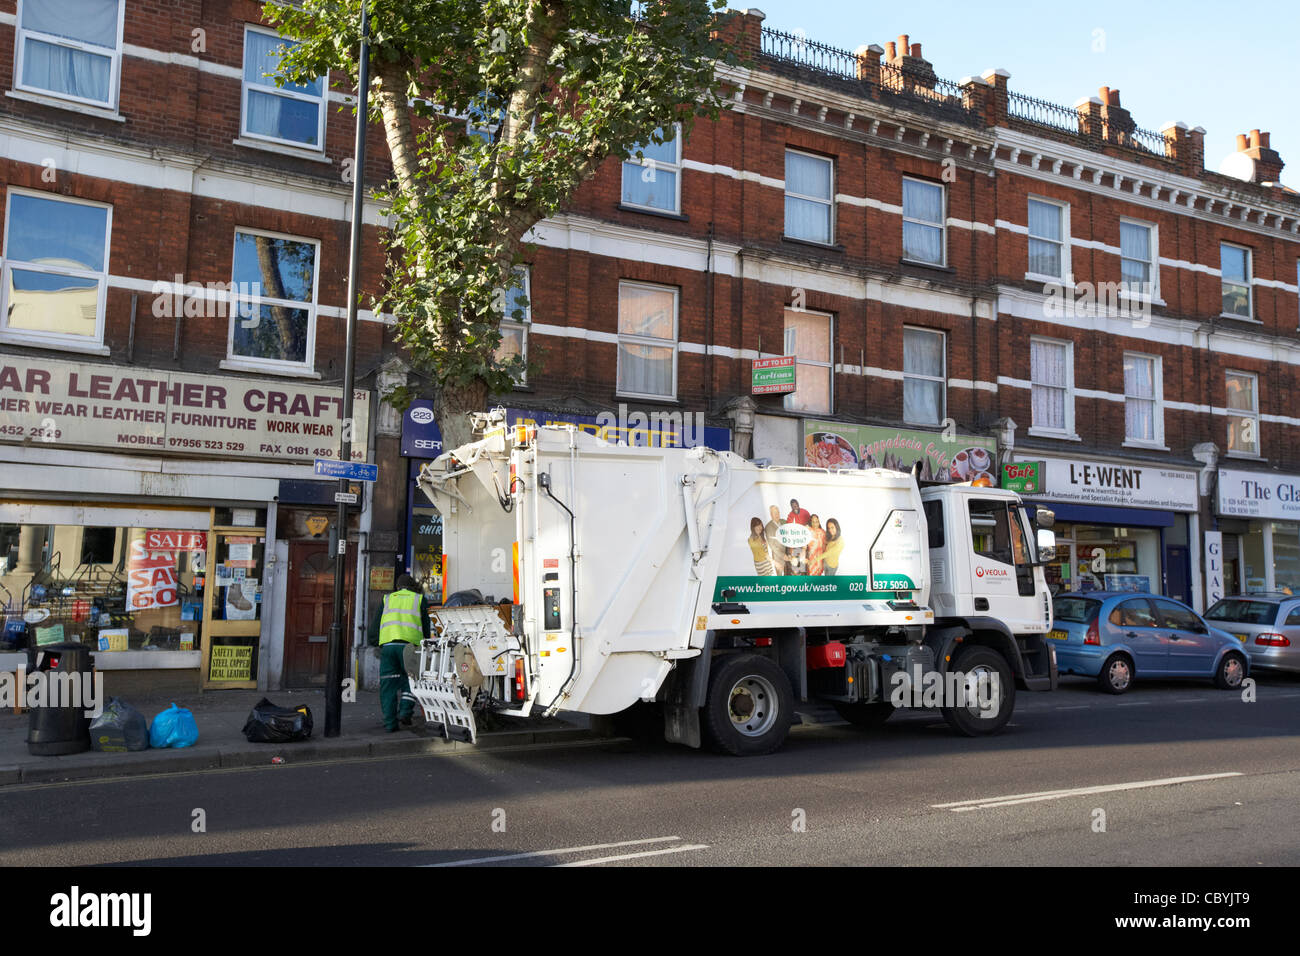 veolia workers working on behalf of local brent council collecting refuse waste in a bin lorry london uk united kingdom Stock Photo